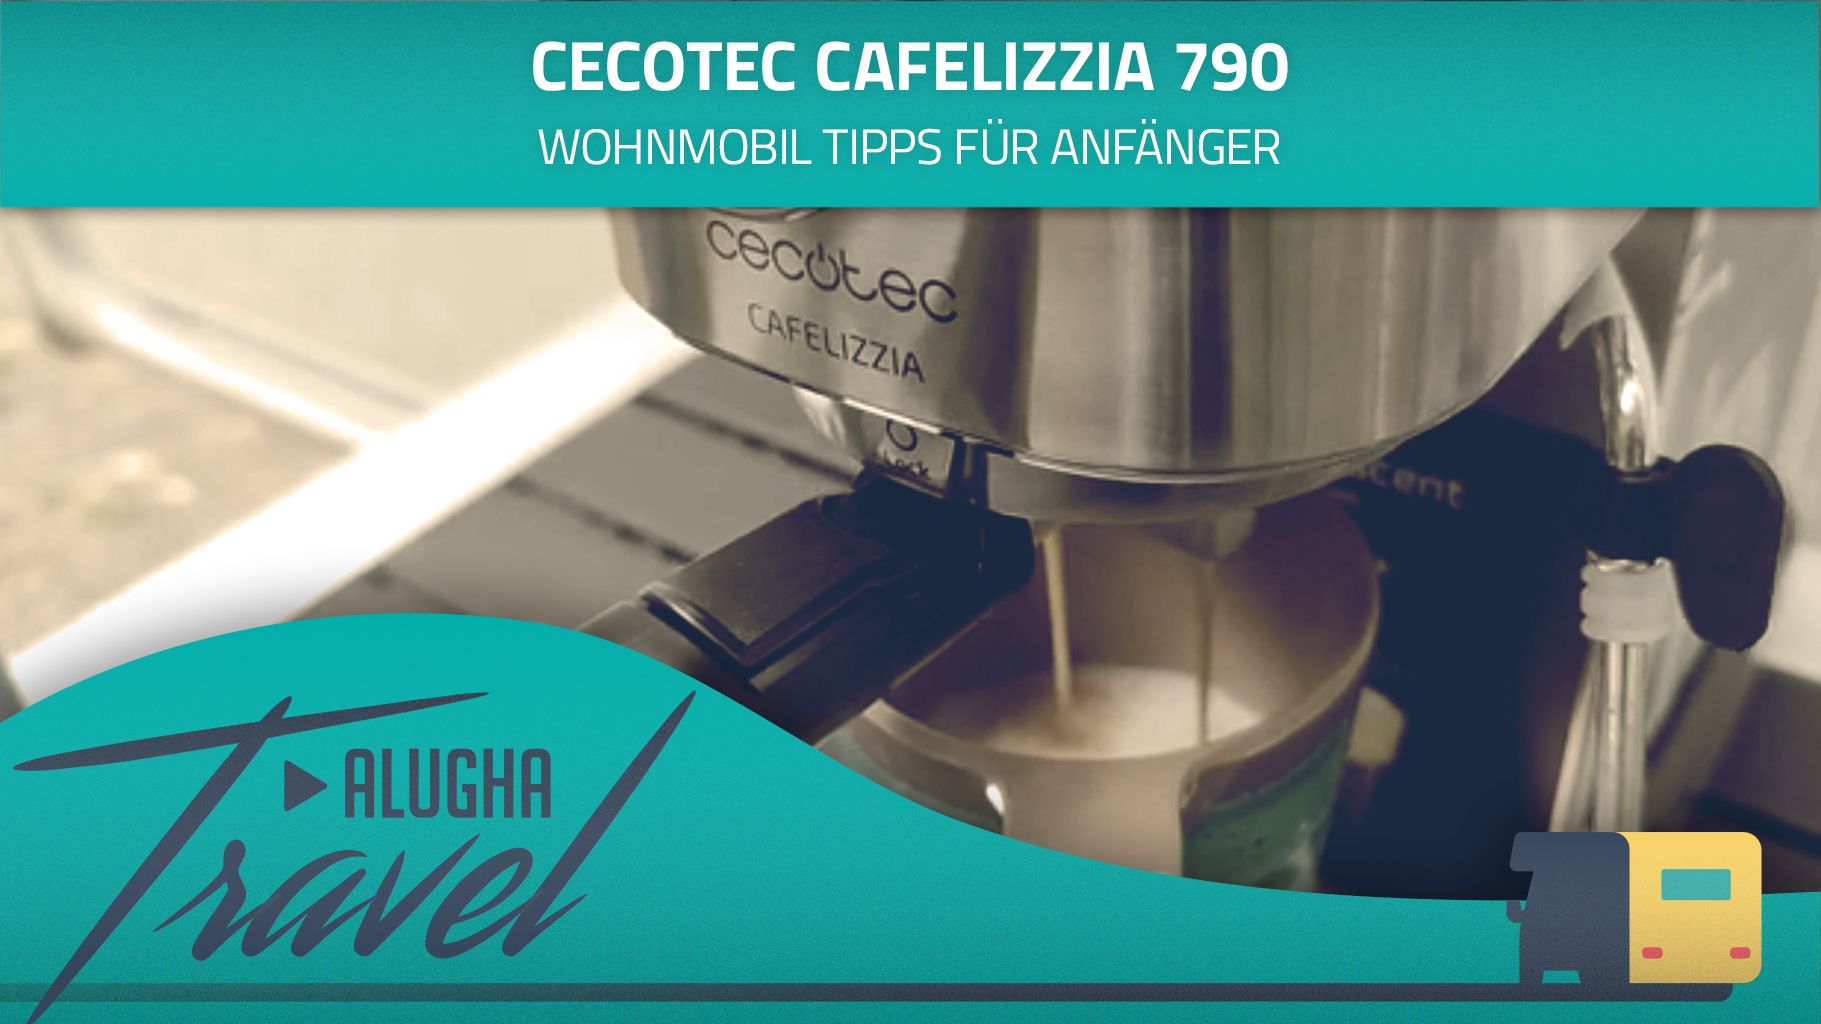 Cecotec Cafelizzia 790 for motorhomes – alugha